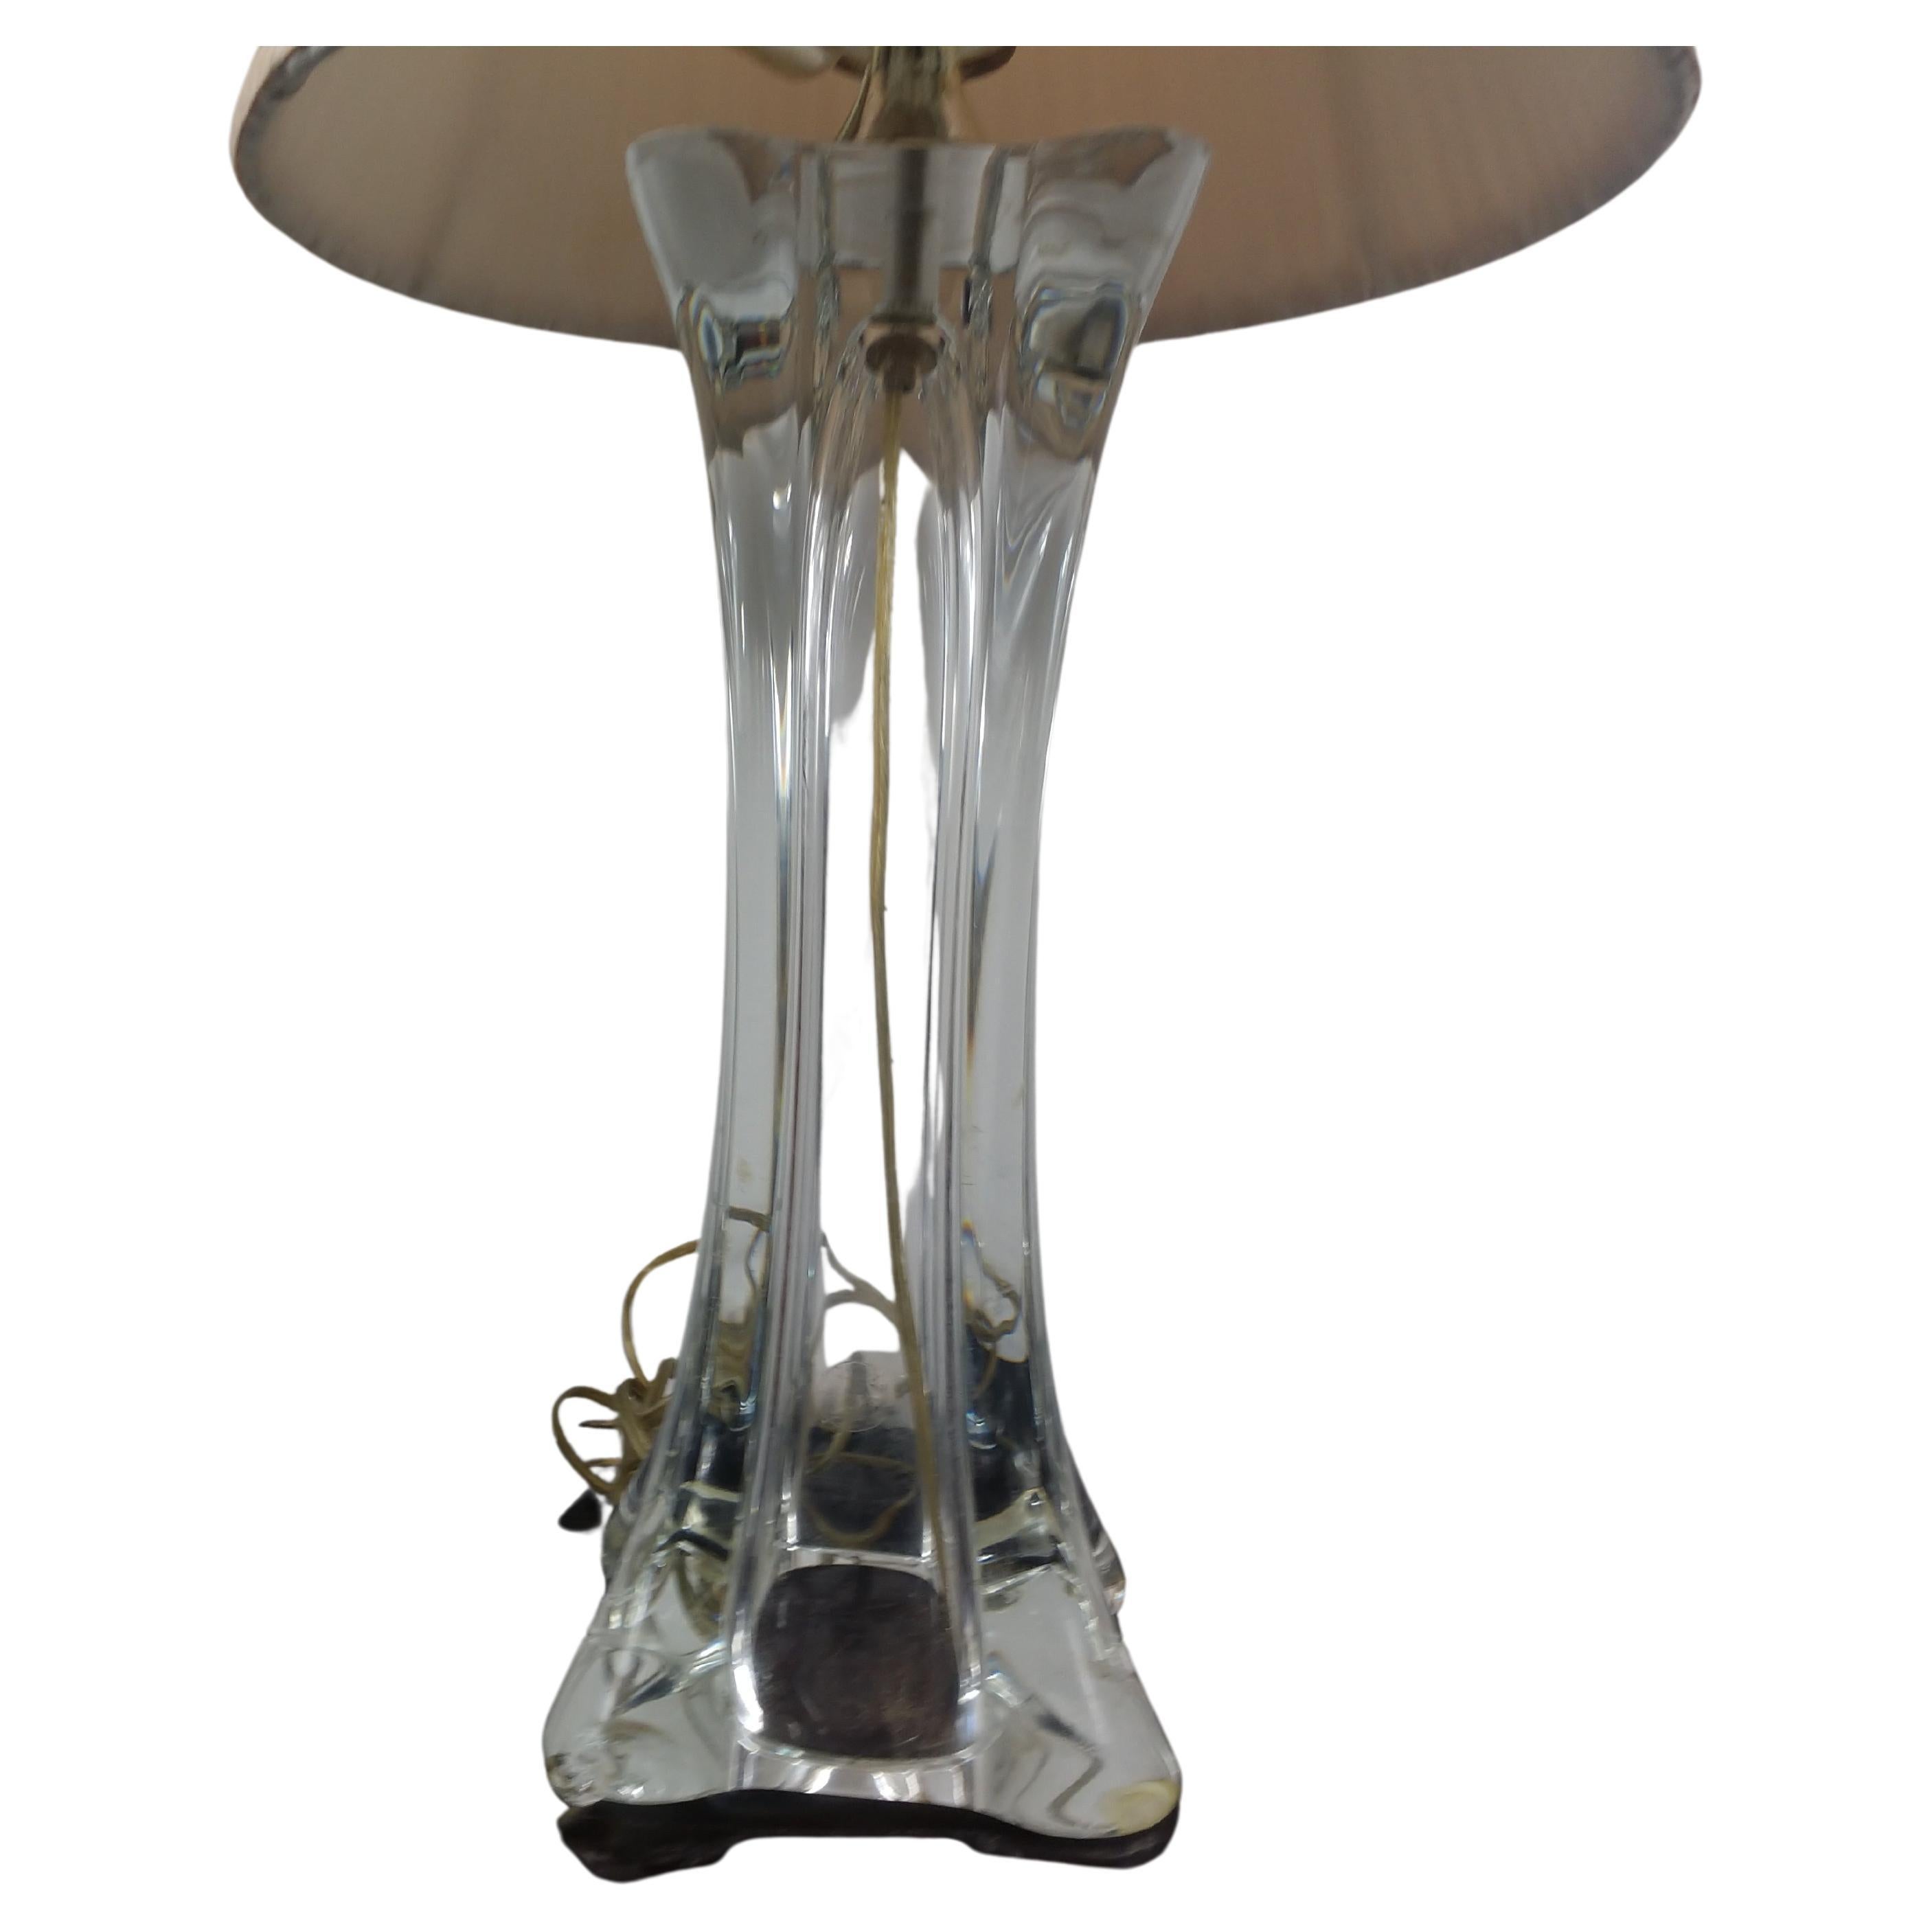 Simple and elegant clear glass column table lamps marked made in France. Solid and with a pair of candlabra sockets make these perfect for a bedside lamp. 29.75 to the top of the shade, which are not included.